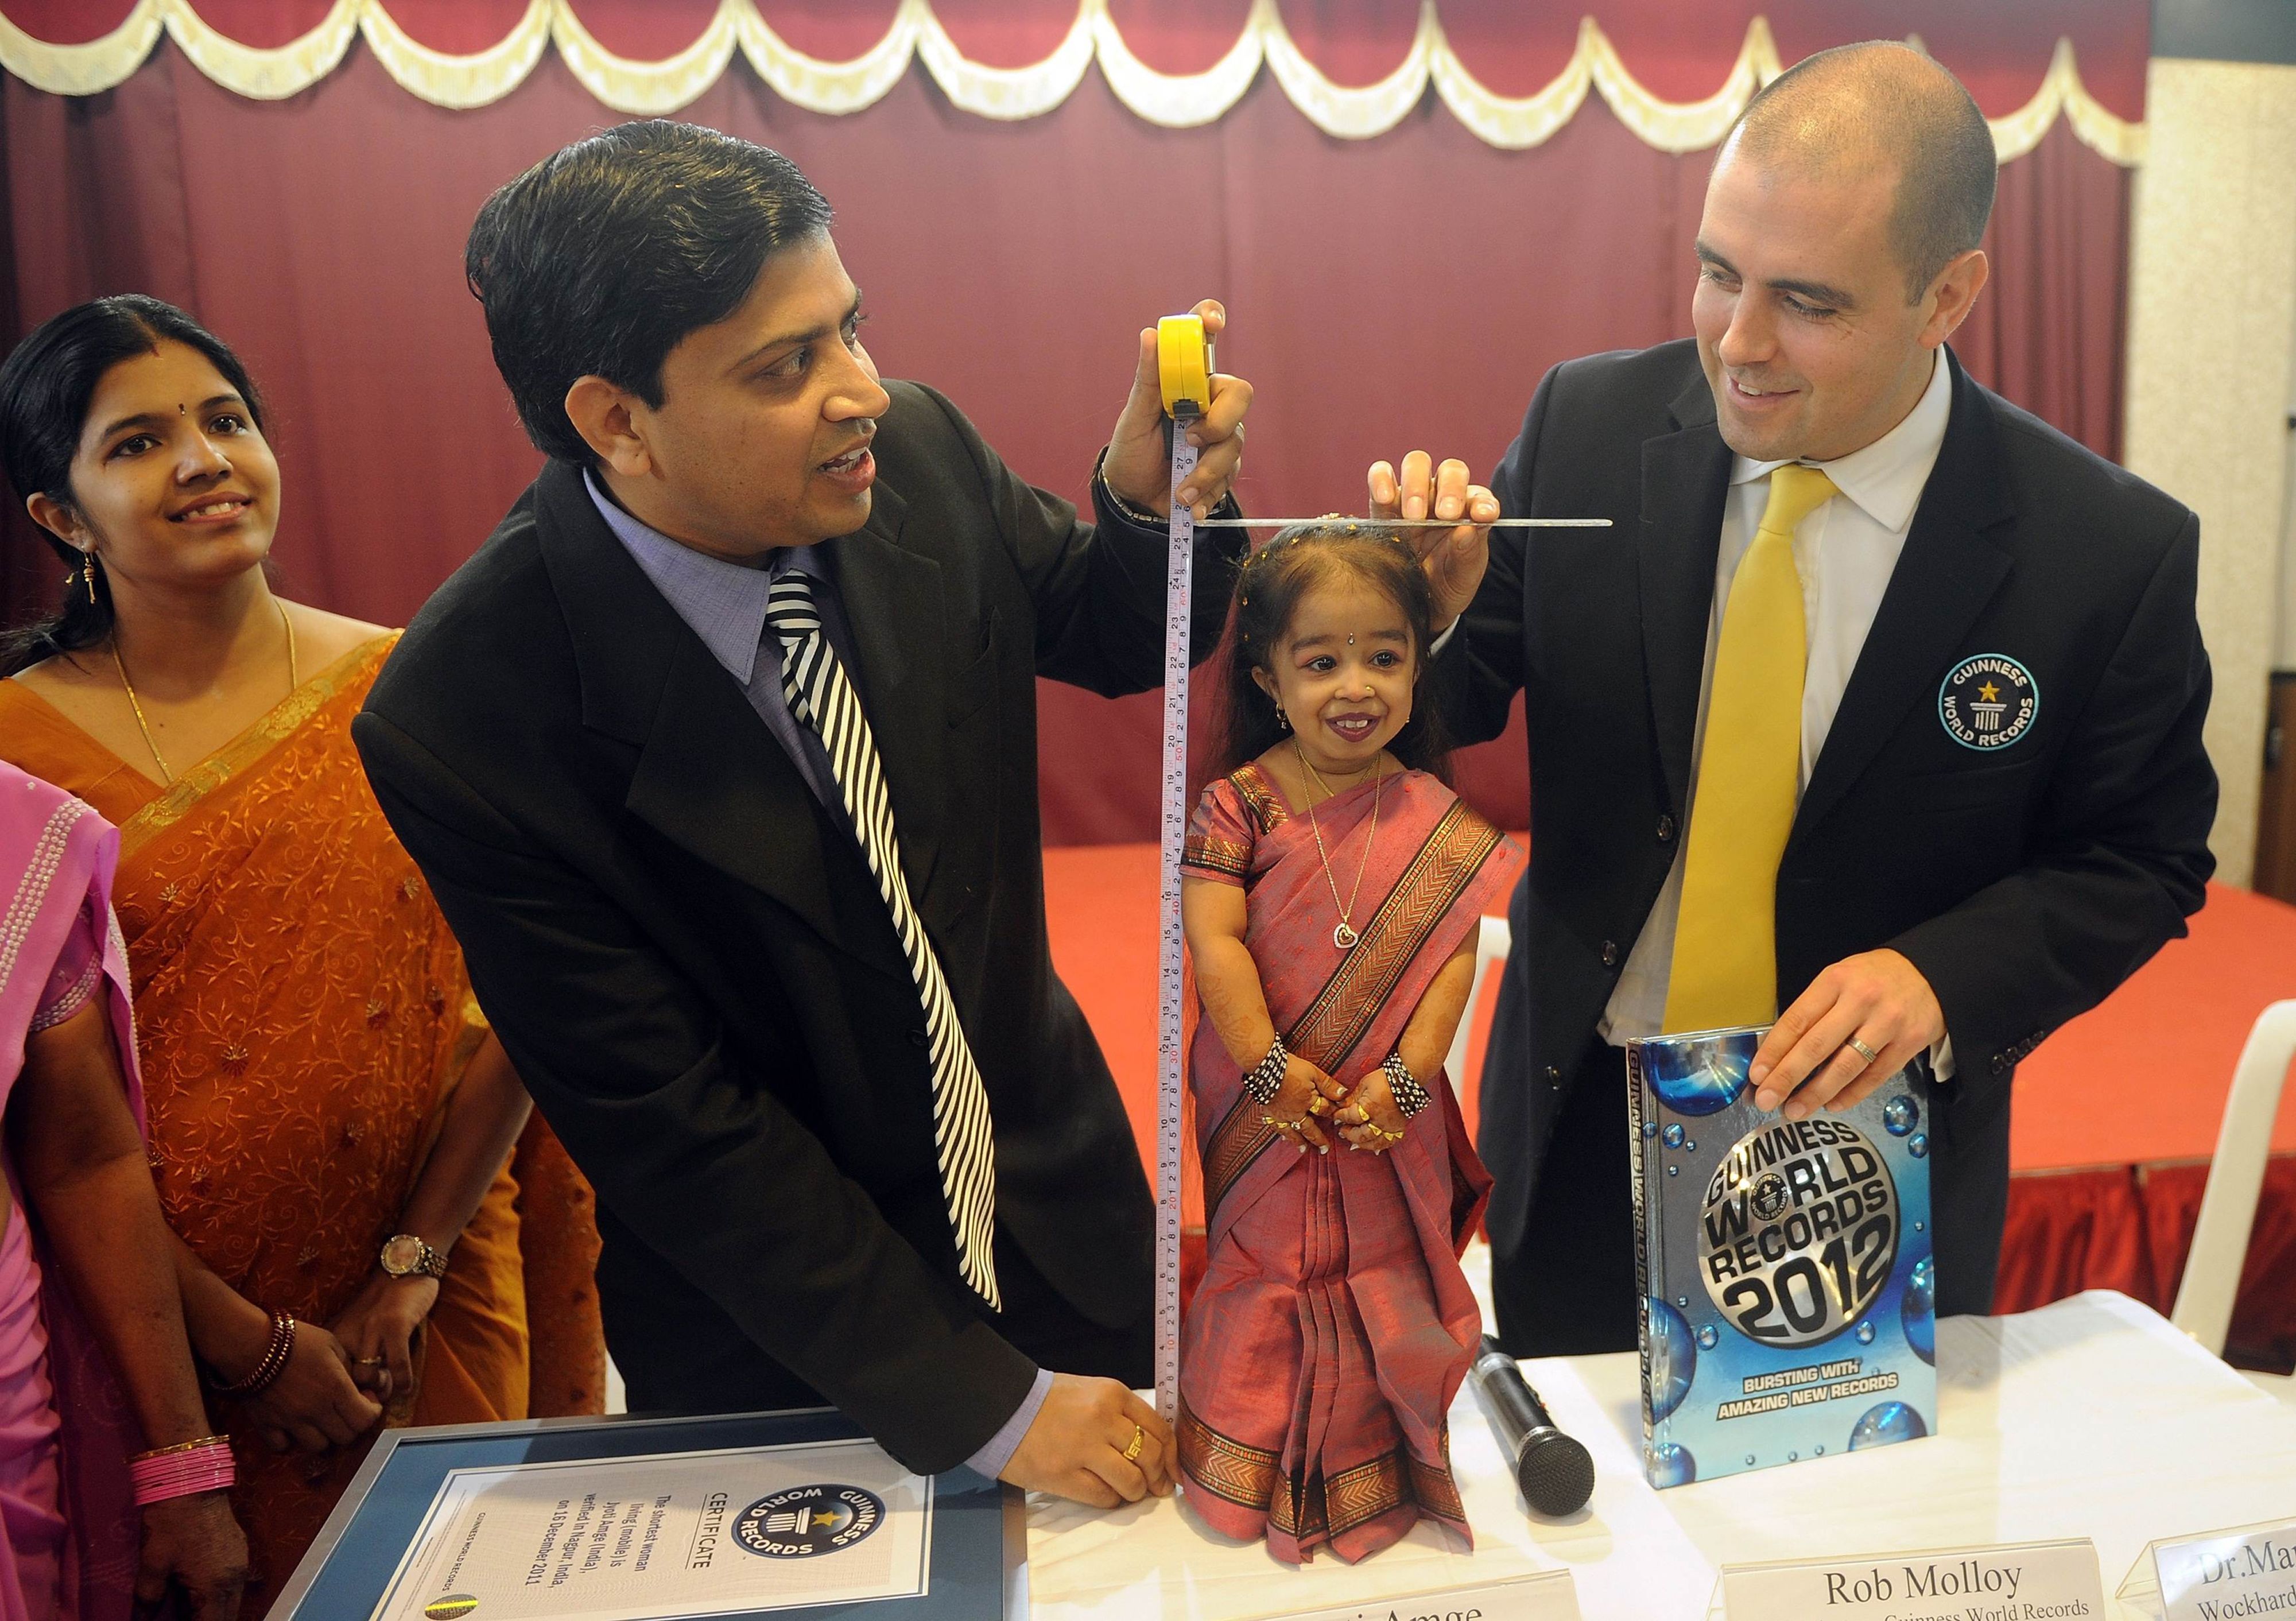 18-year-old in India named world's shortest woman